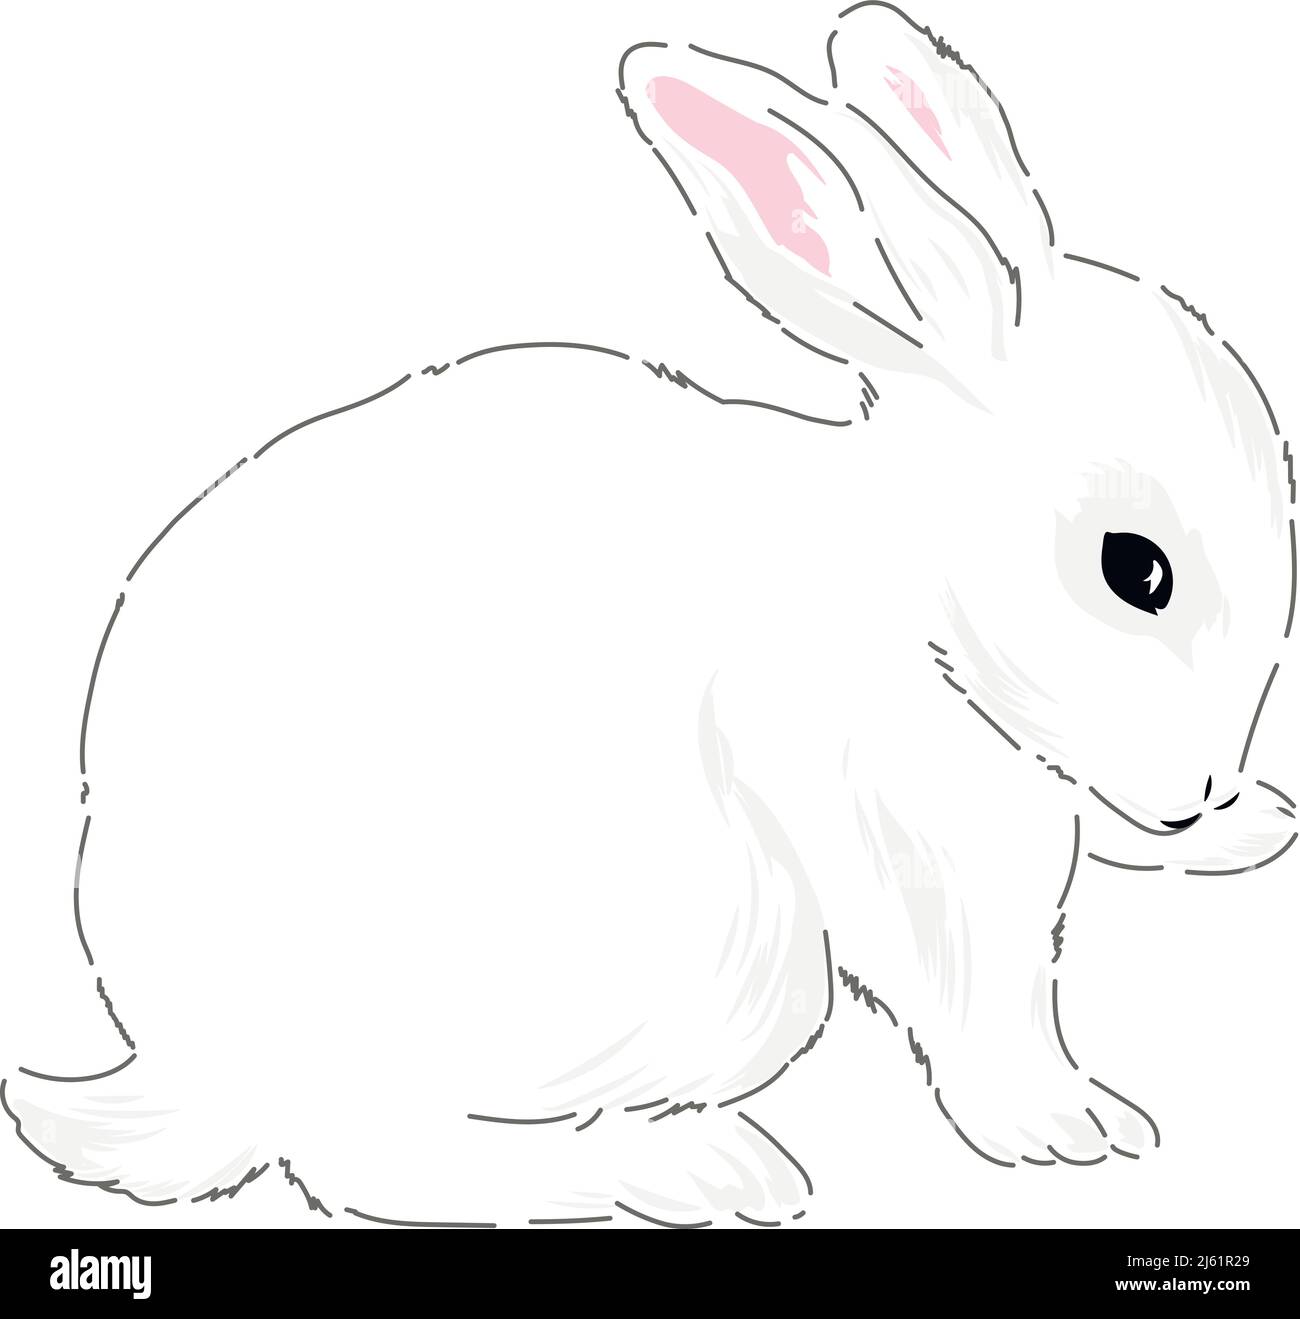 Cute spring Easter bunny hand drawn vector illustration isolated on white. Vintage classic aesthetic print.  Stock Vector